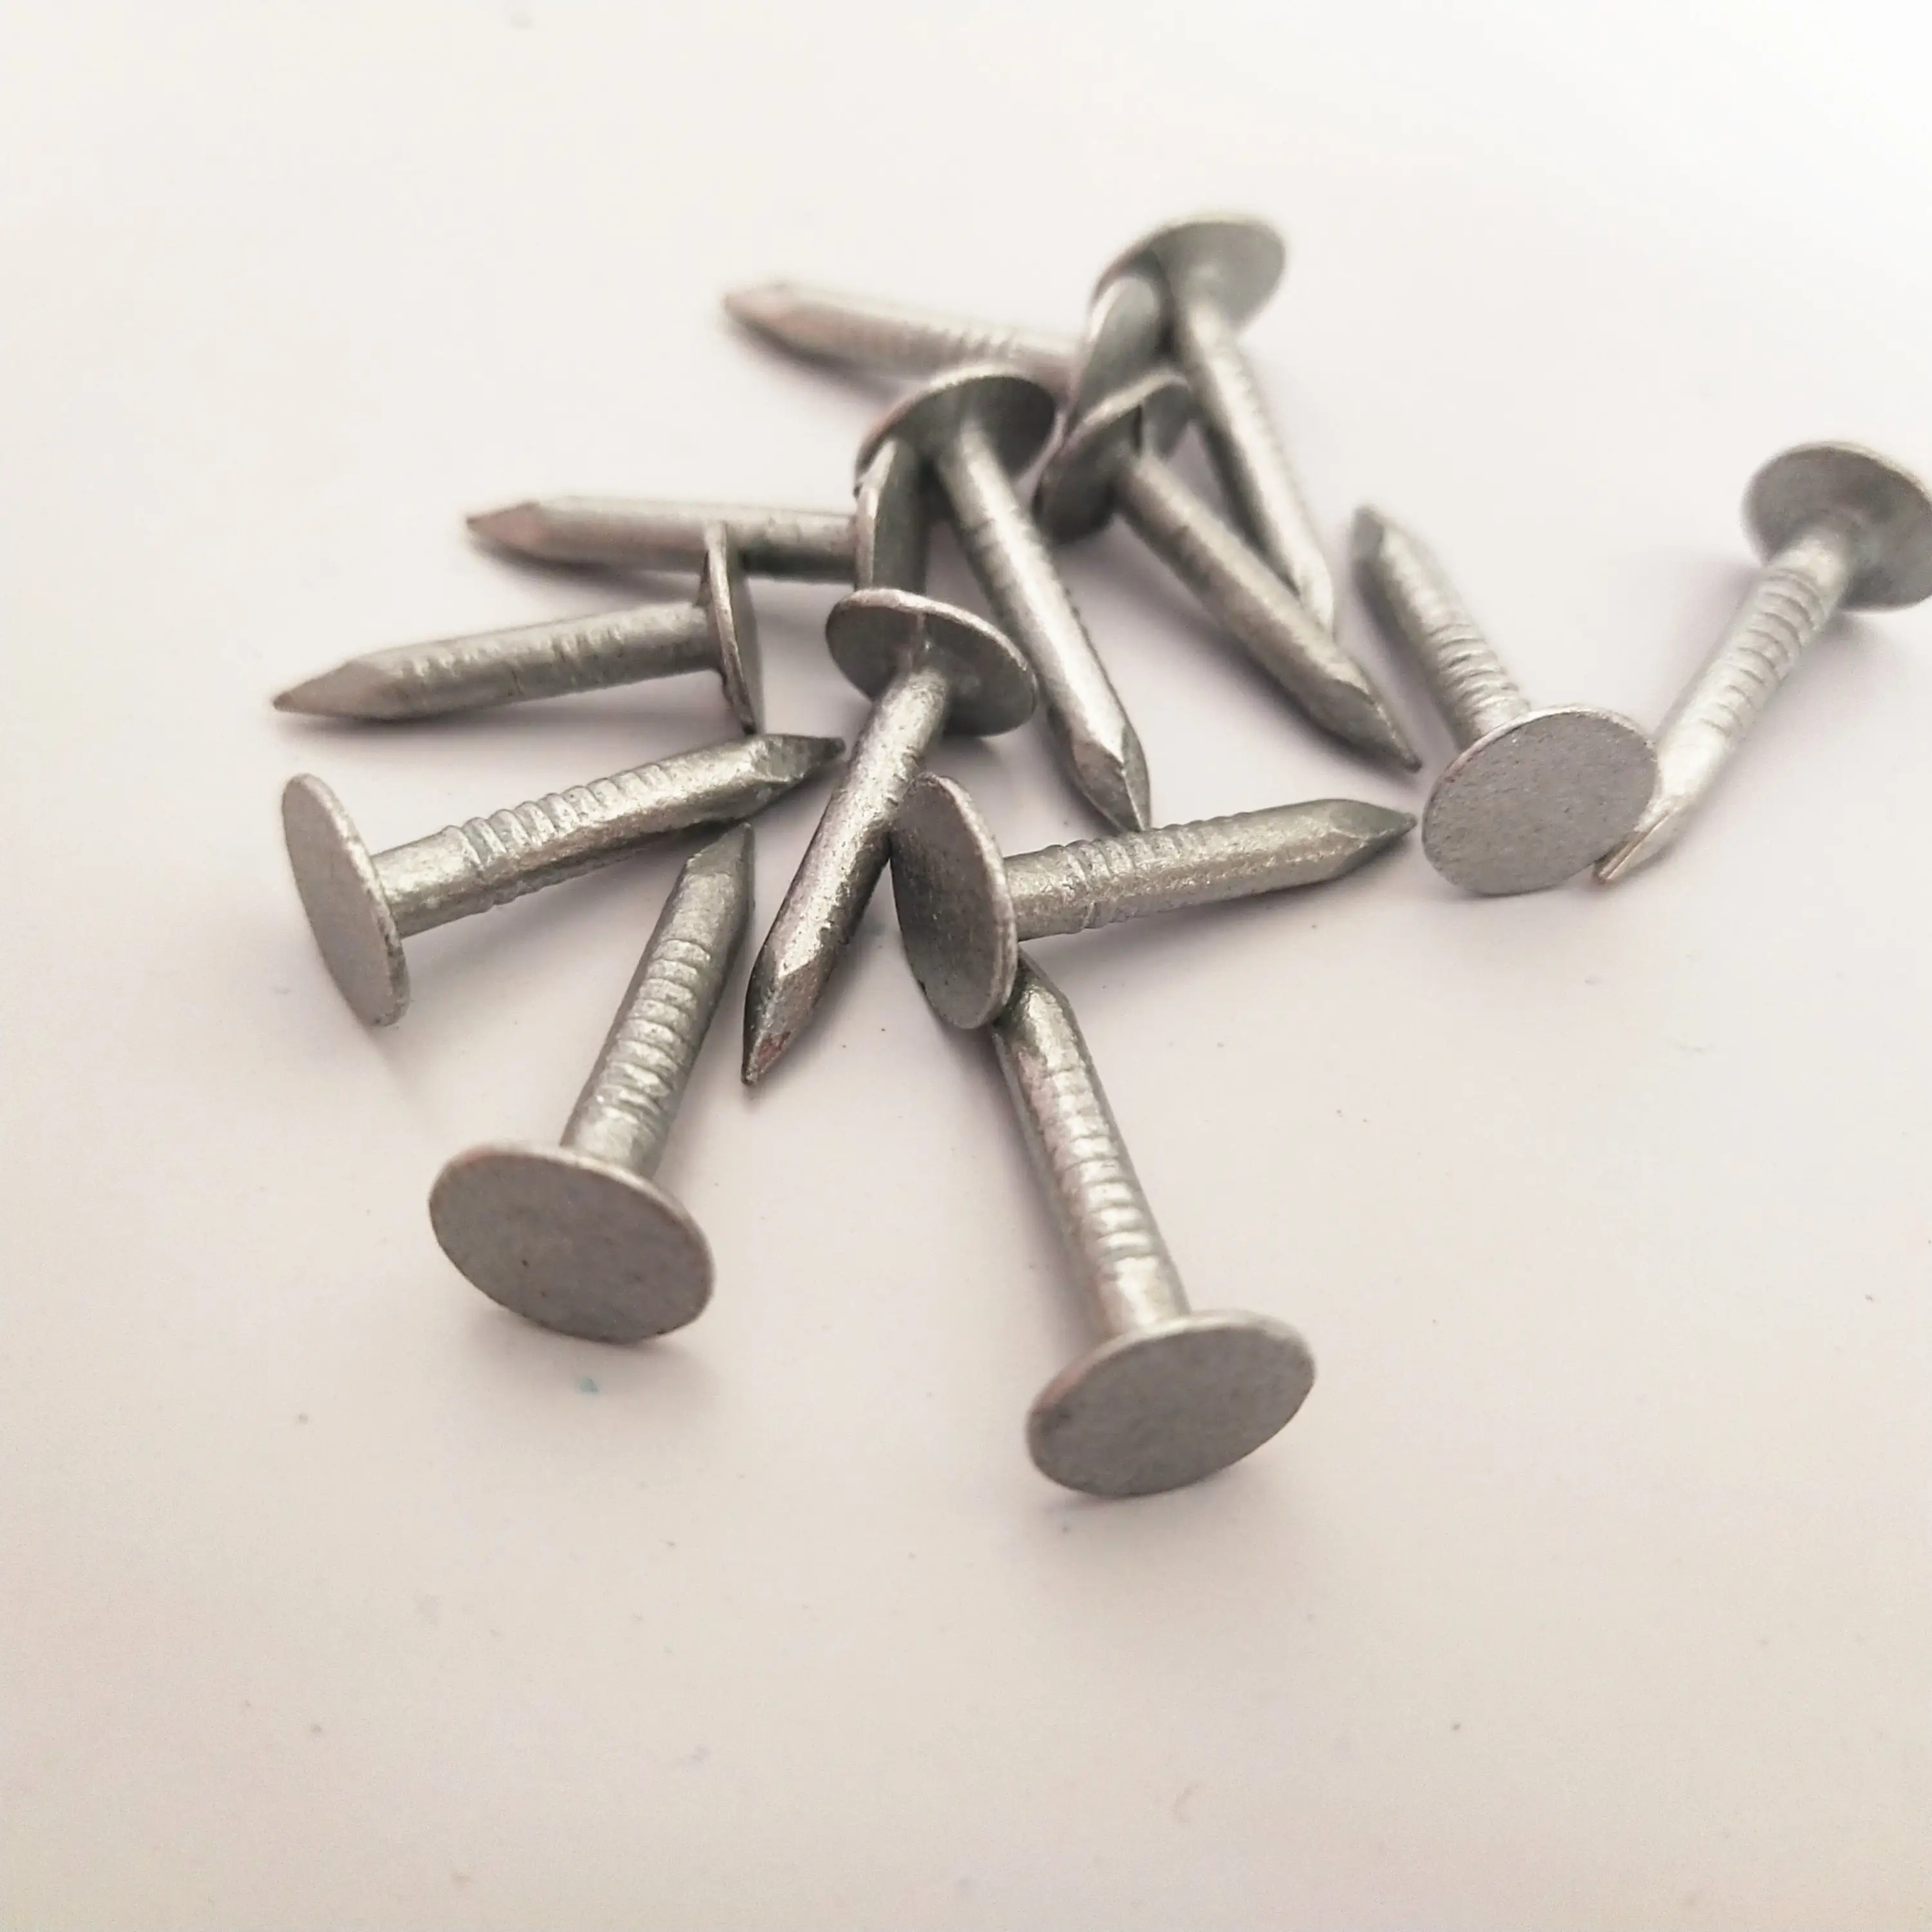 Flat Big Head Clout Nails Galvanized with 1-1/4" ceiling nails